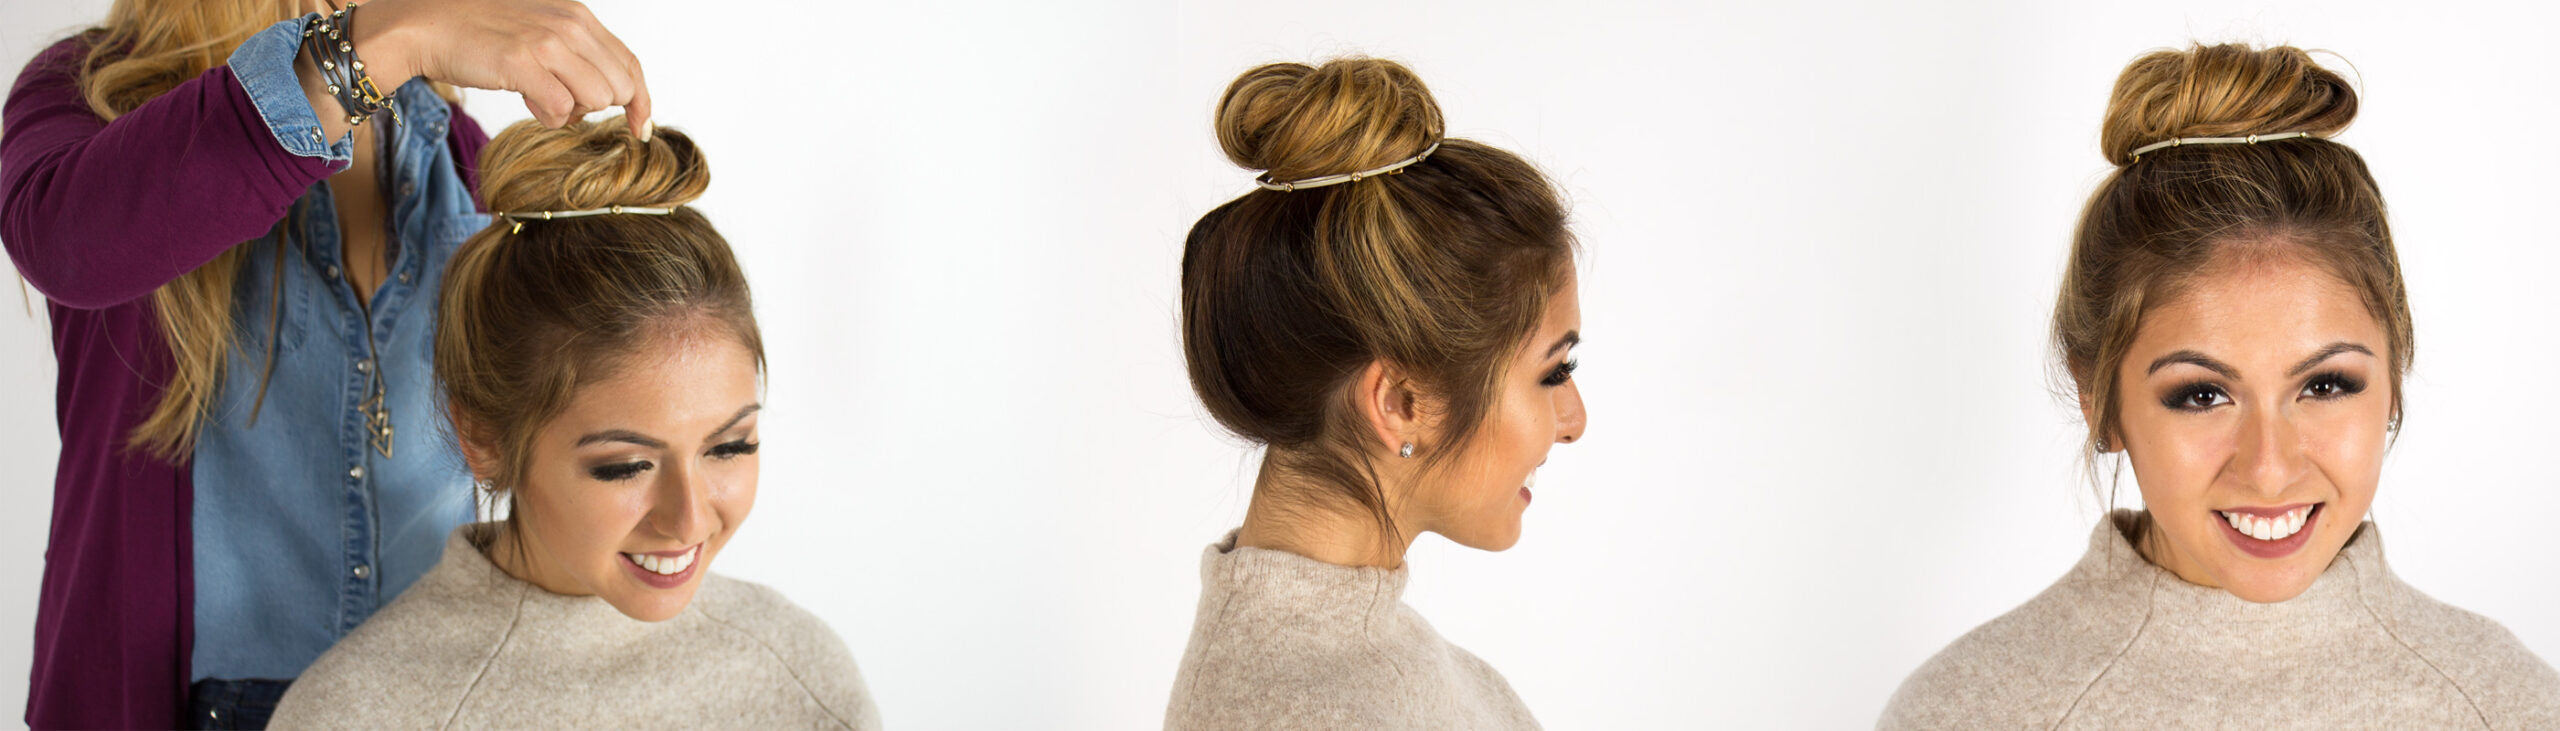 Build the perfect hair bun with these quick steps.